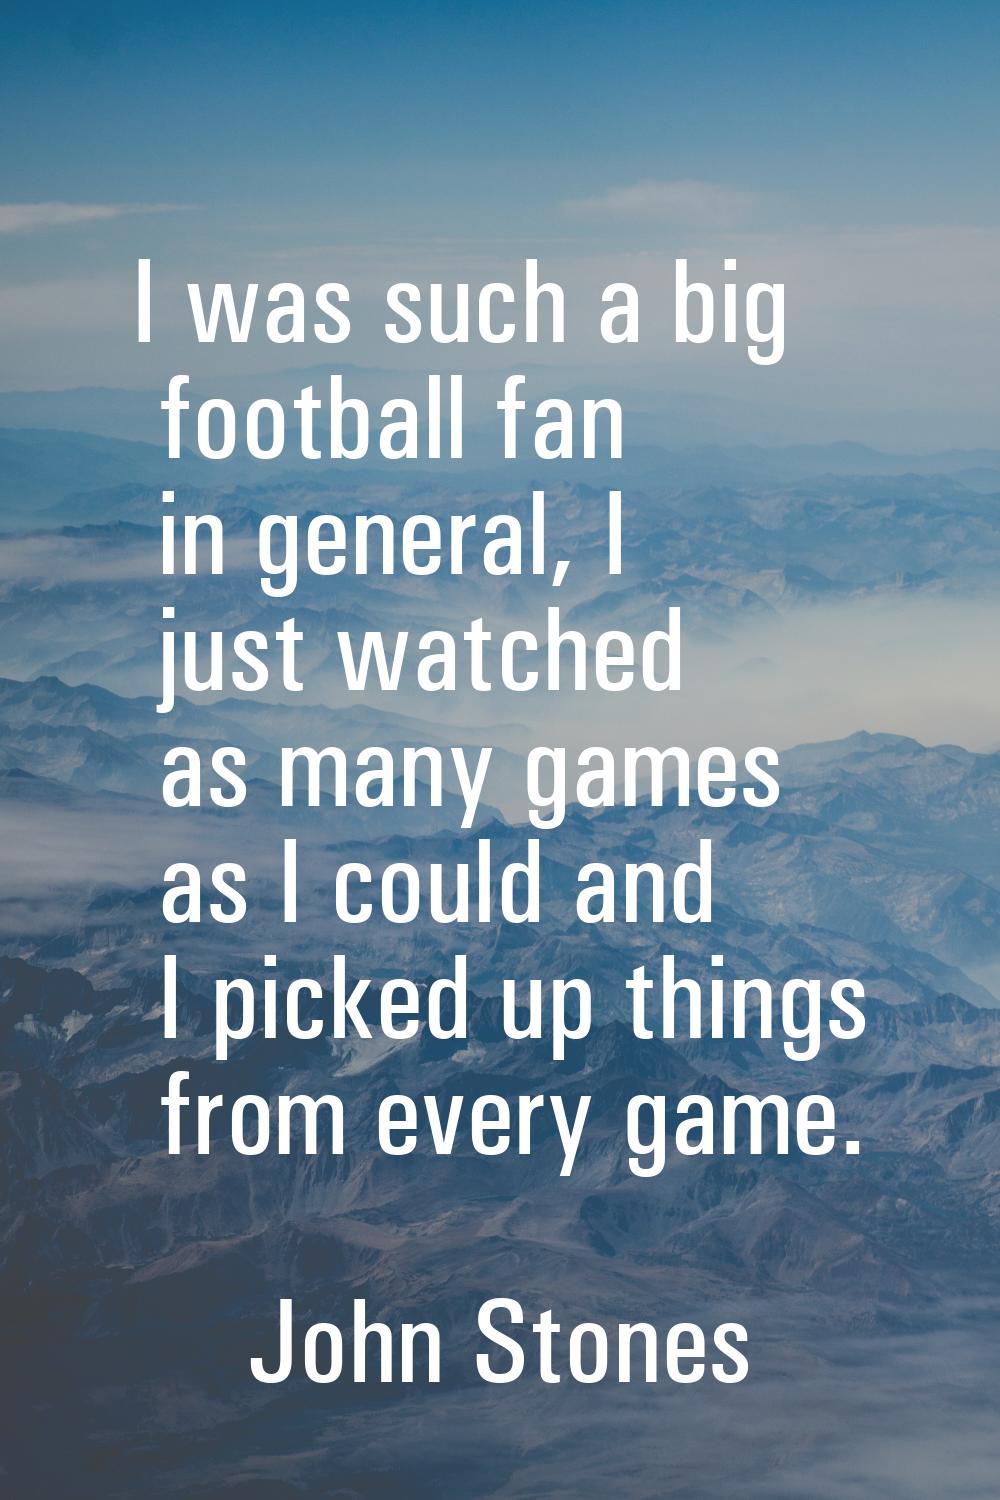 I was such a big football fan in general, I just watched as many games as I could and I picked up t